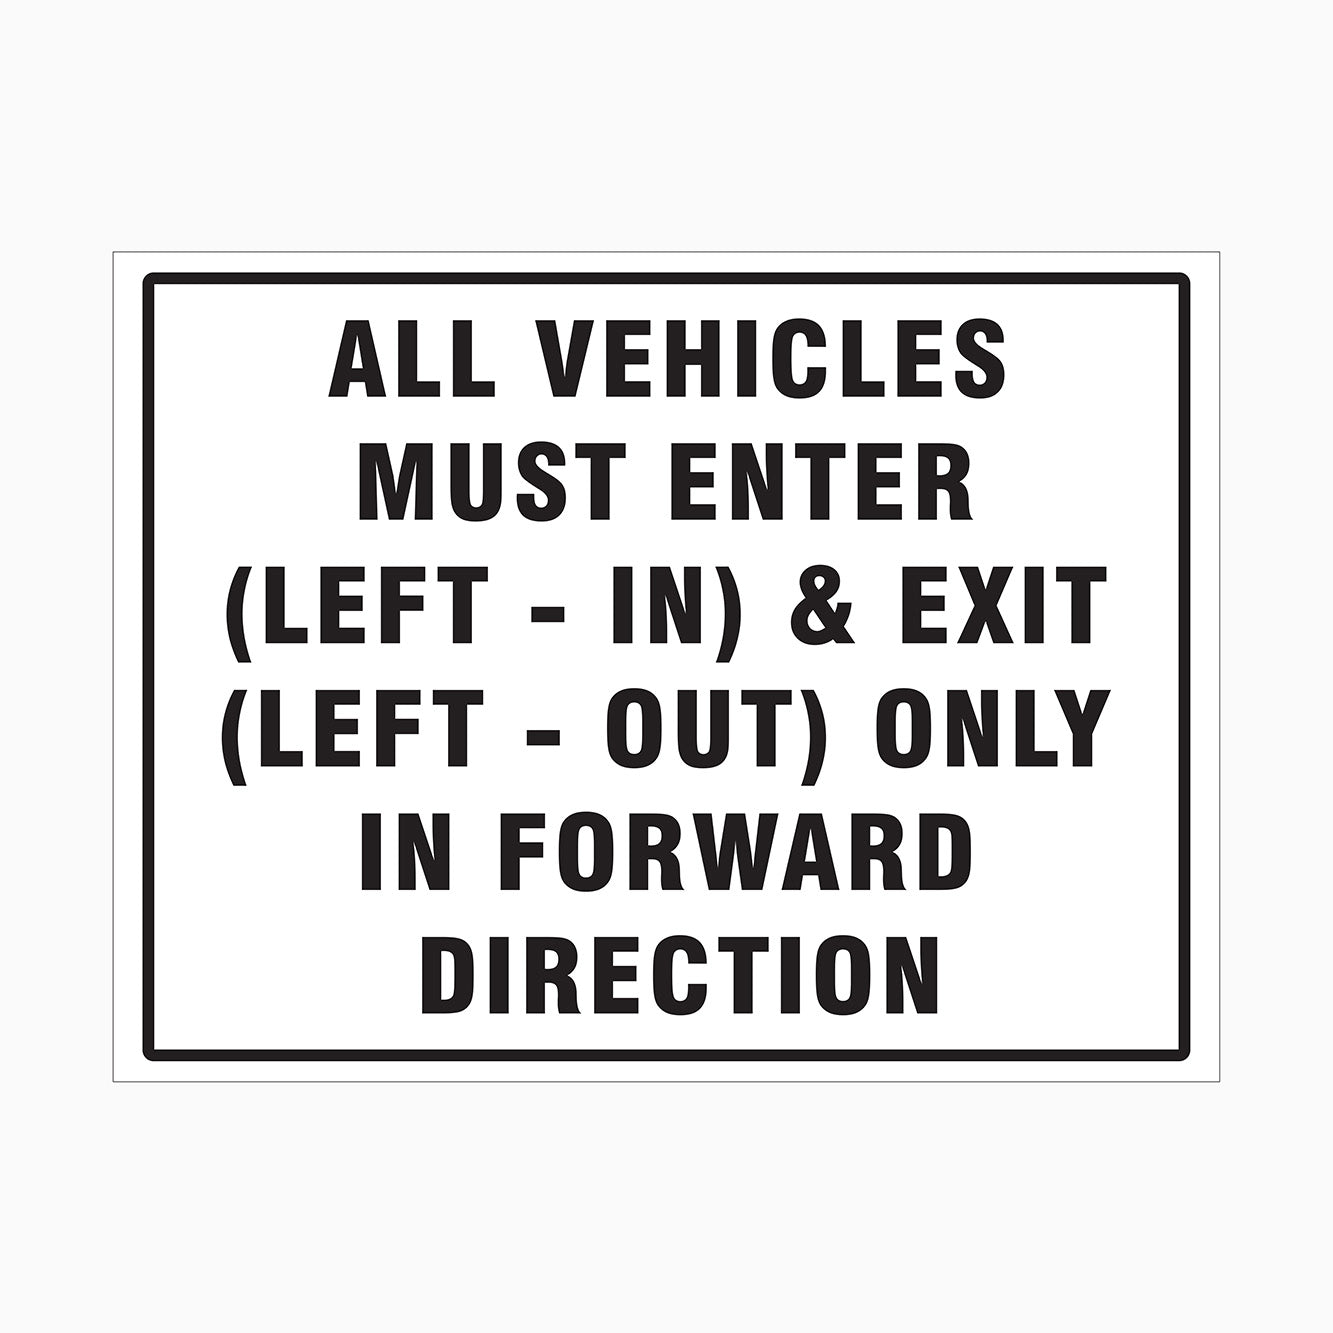 ALL VEHICLES MUST ENTER (LEFT-IN) & EXIT (LEFT-OUT) ONLY IN FORWARD DIRECTION SIGN